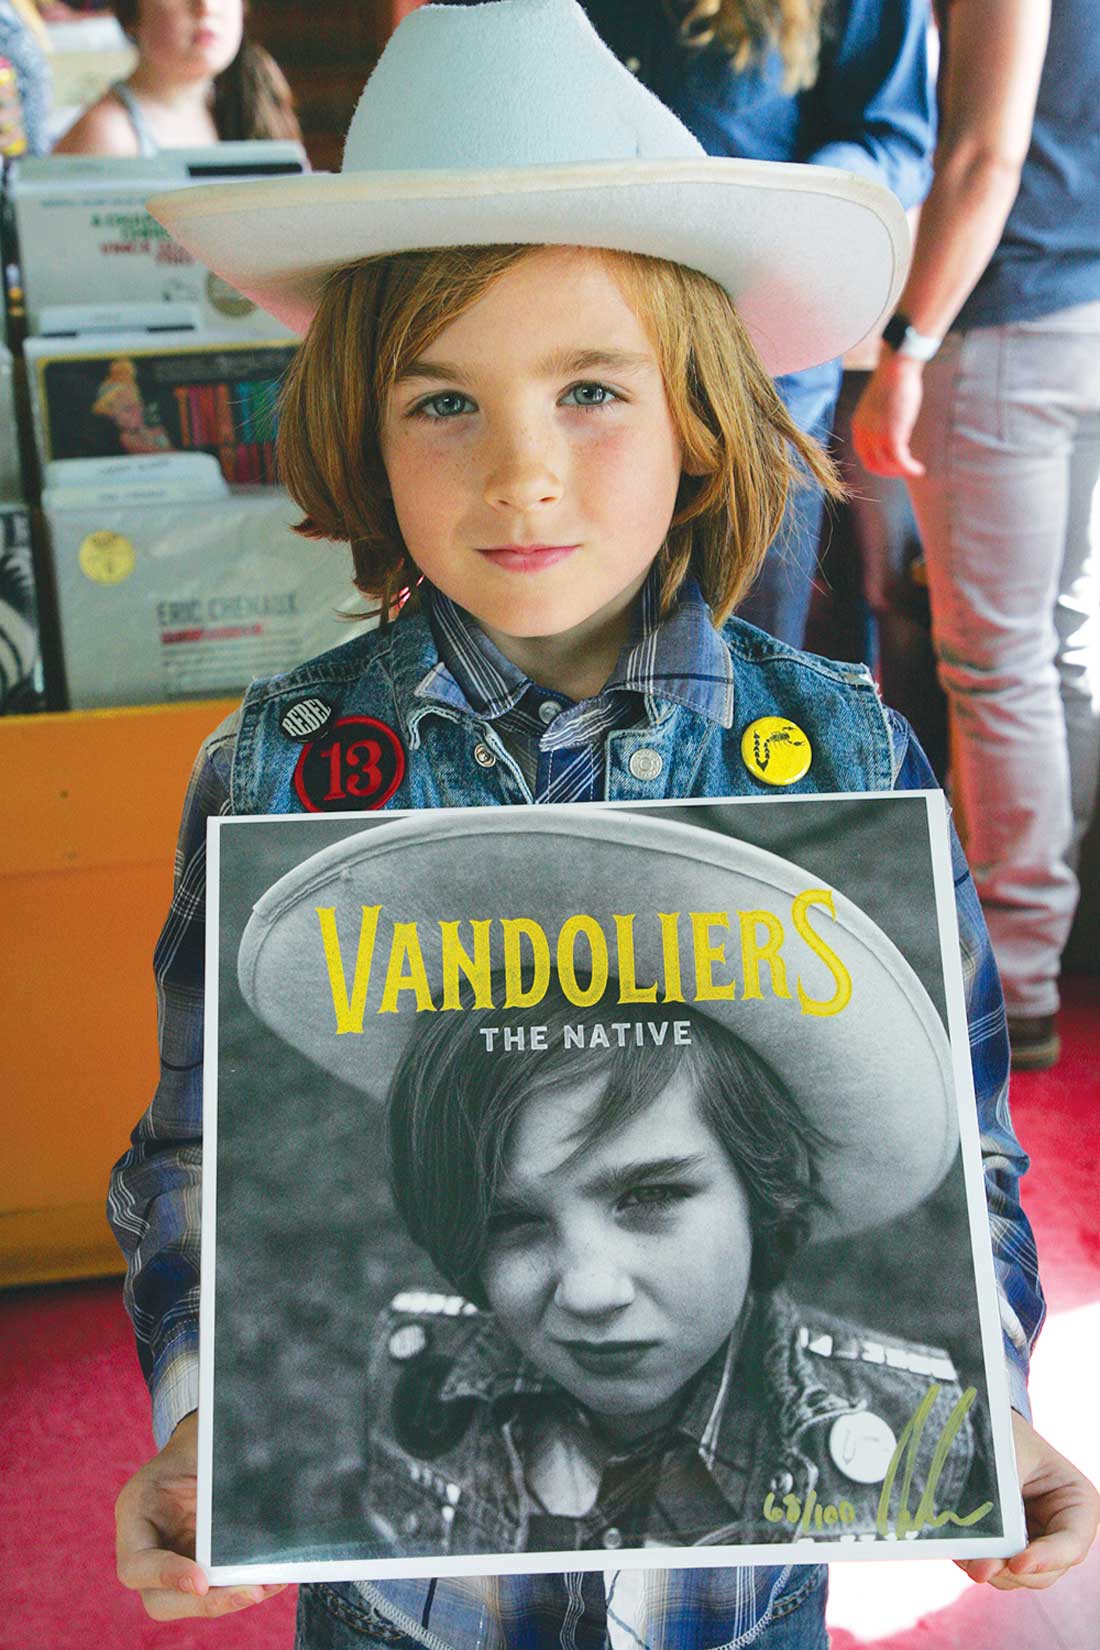 Hear the premiere of Vandoliers' 'bluegrass mix' of 'Simon Says